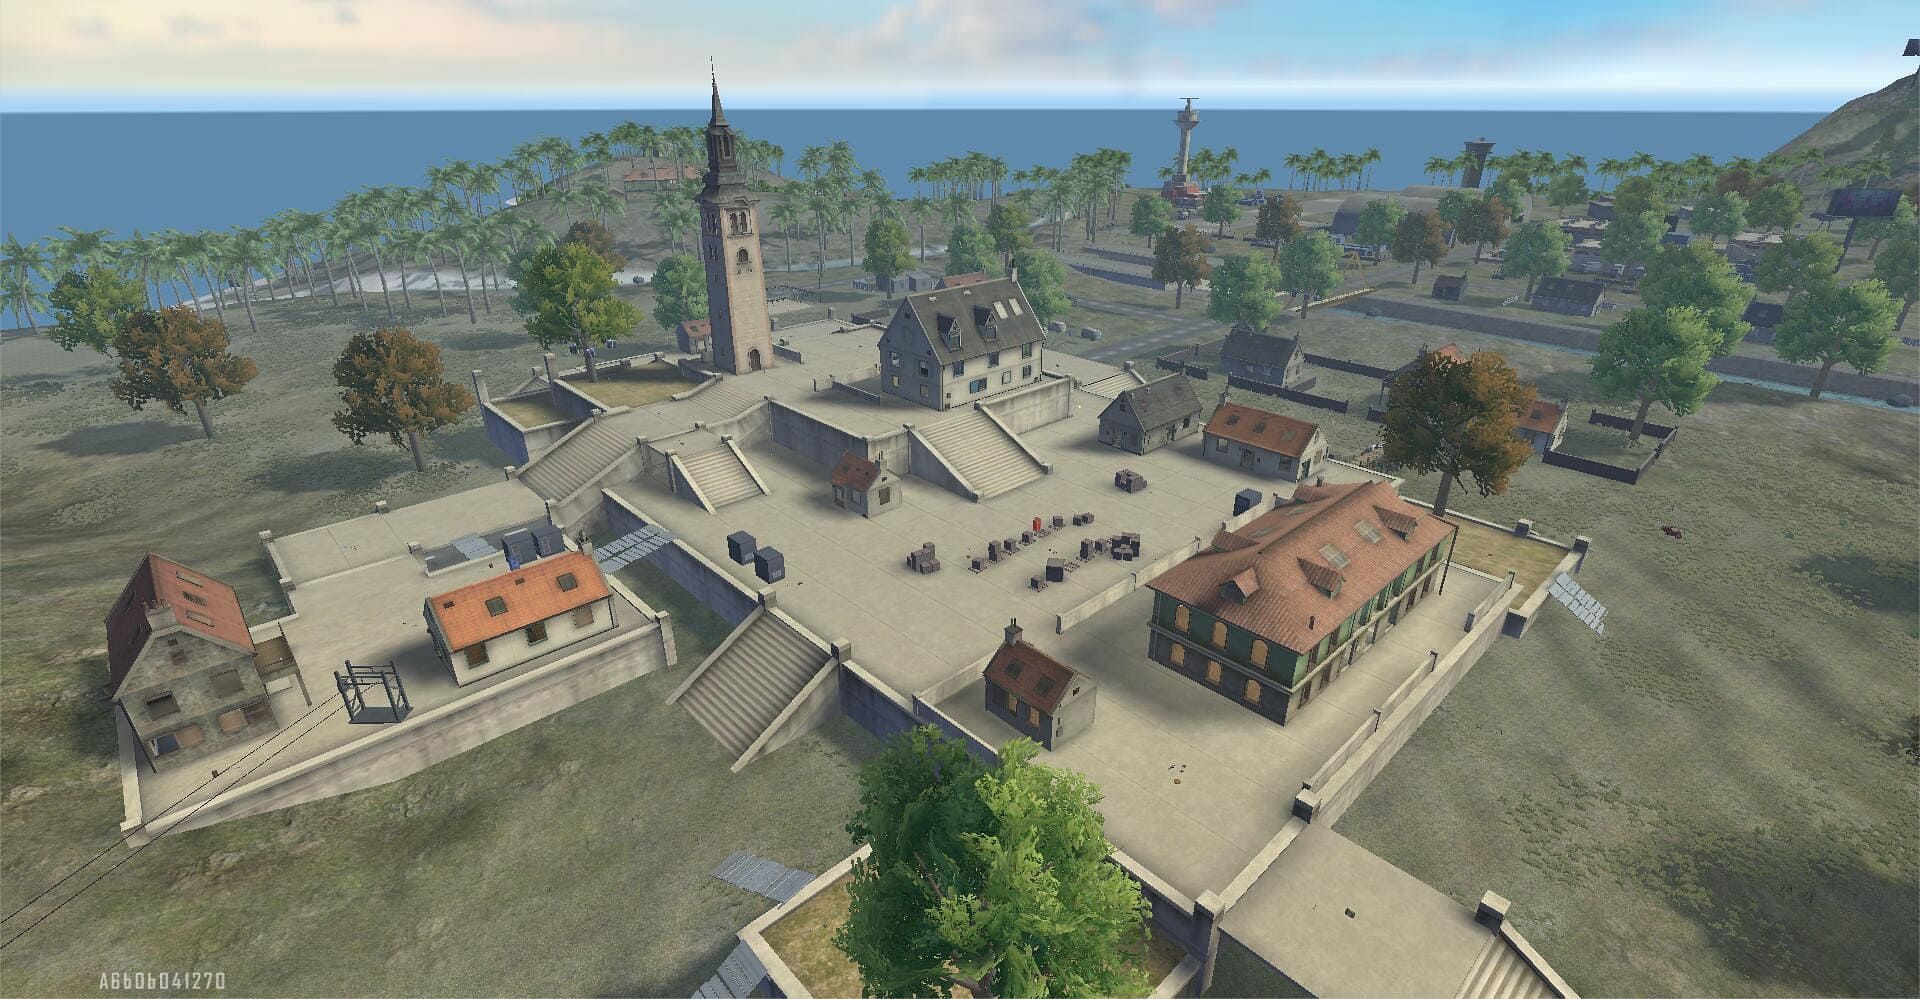 Clock Tower in Bermuda is a risky location but offers decent cover (Image via Garena)